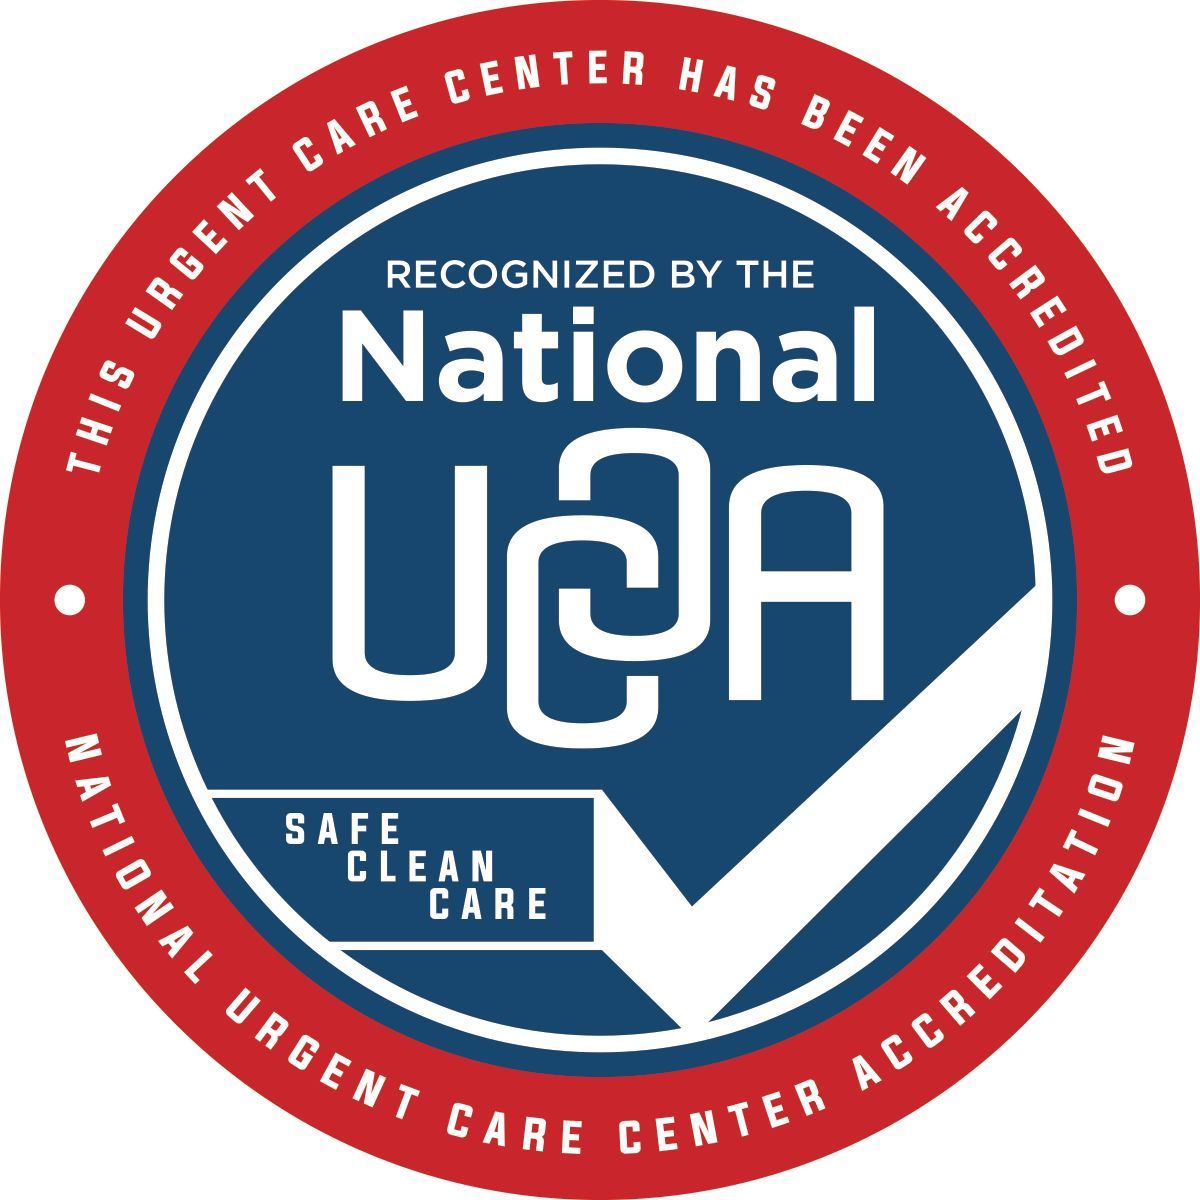 National Urgent Care Accreditation Seal